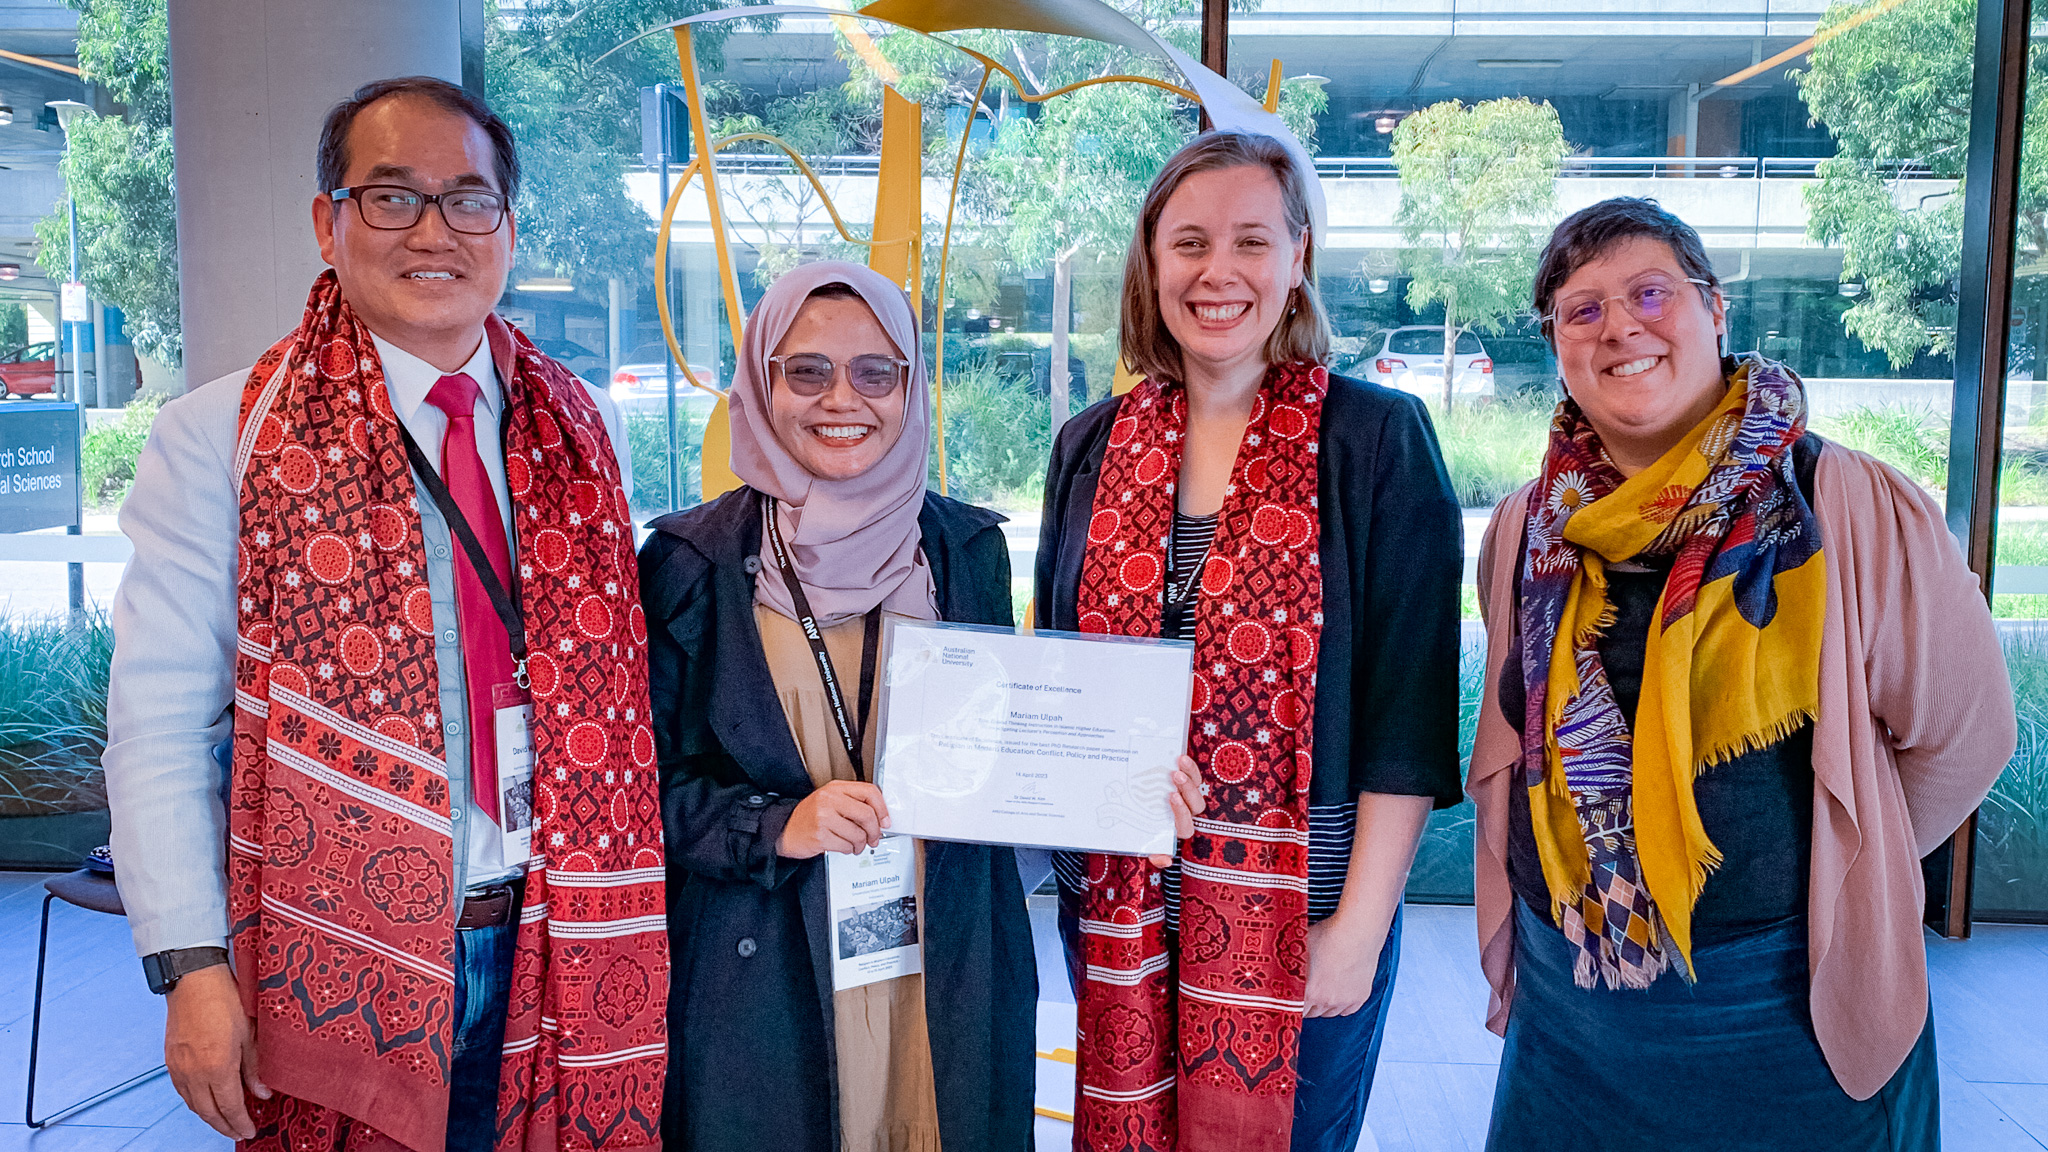 UIII Master's Student Awarded Best Paper at ANU Religion Conference in Australia